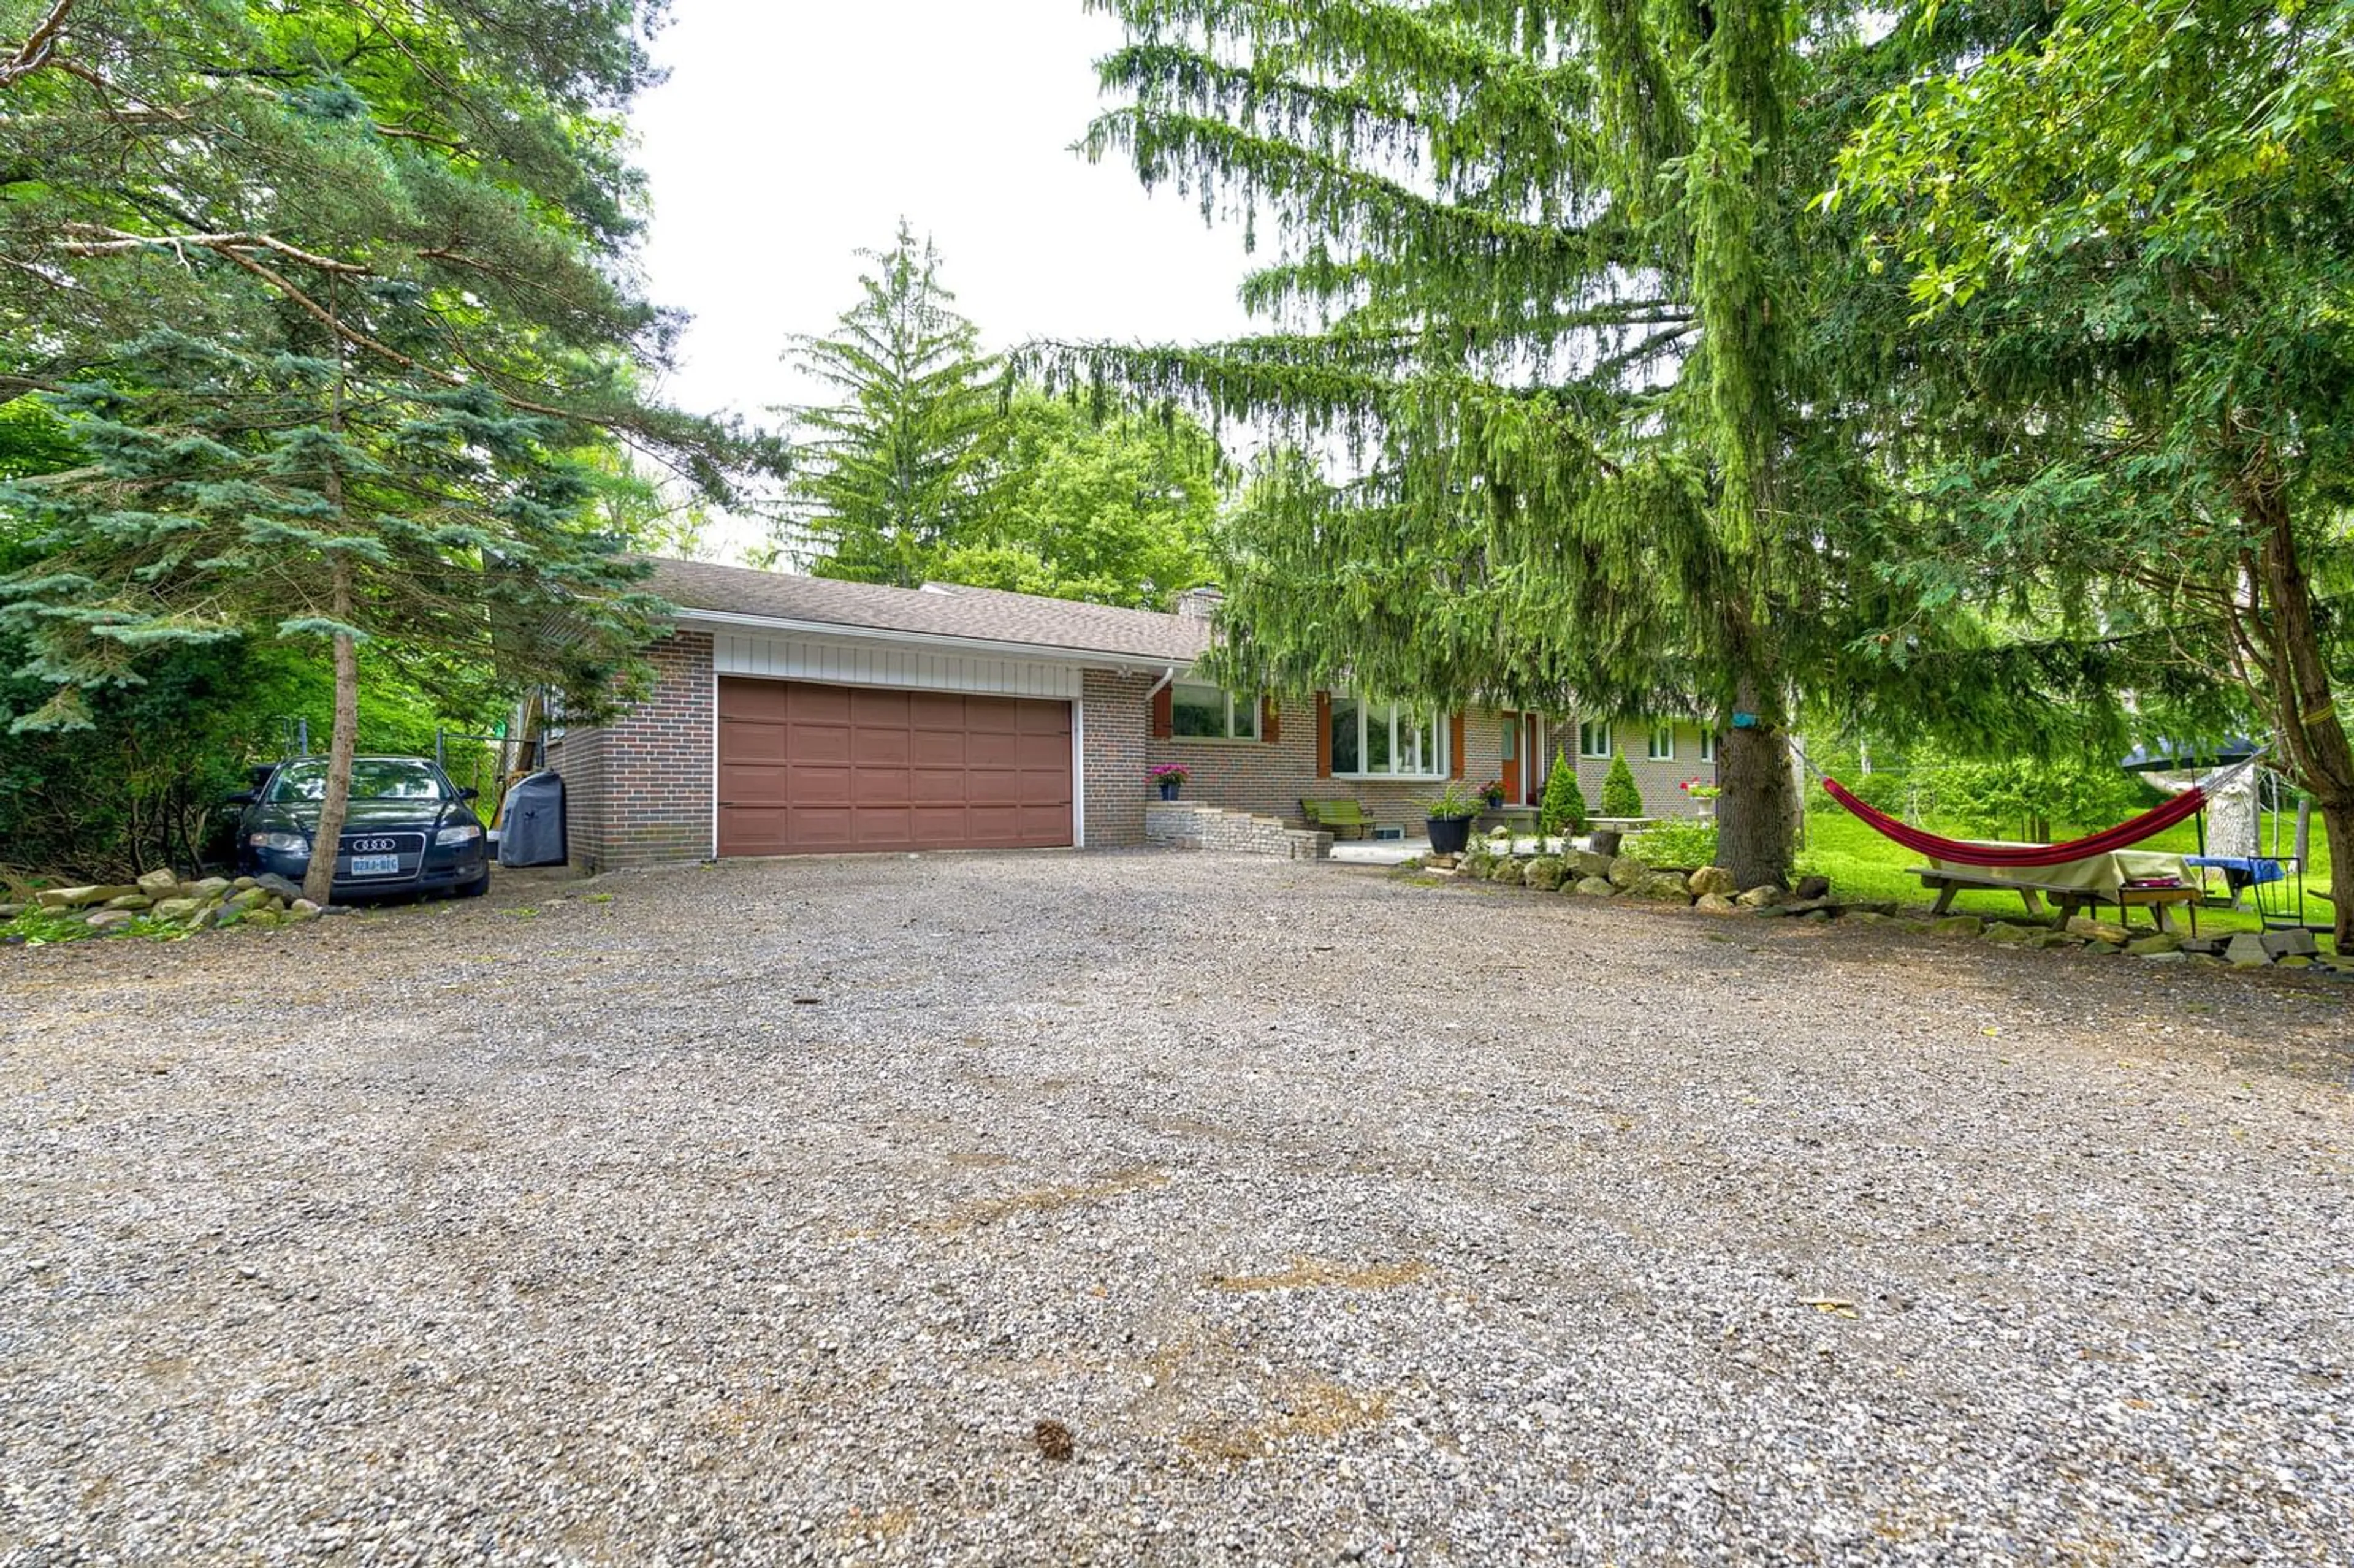 Outside view for 7454 Old Church Rd, Caledon Ontario L7C 0H5